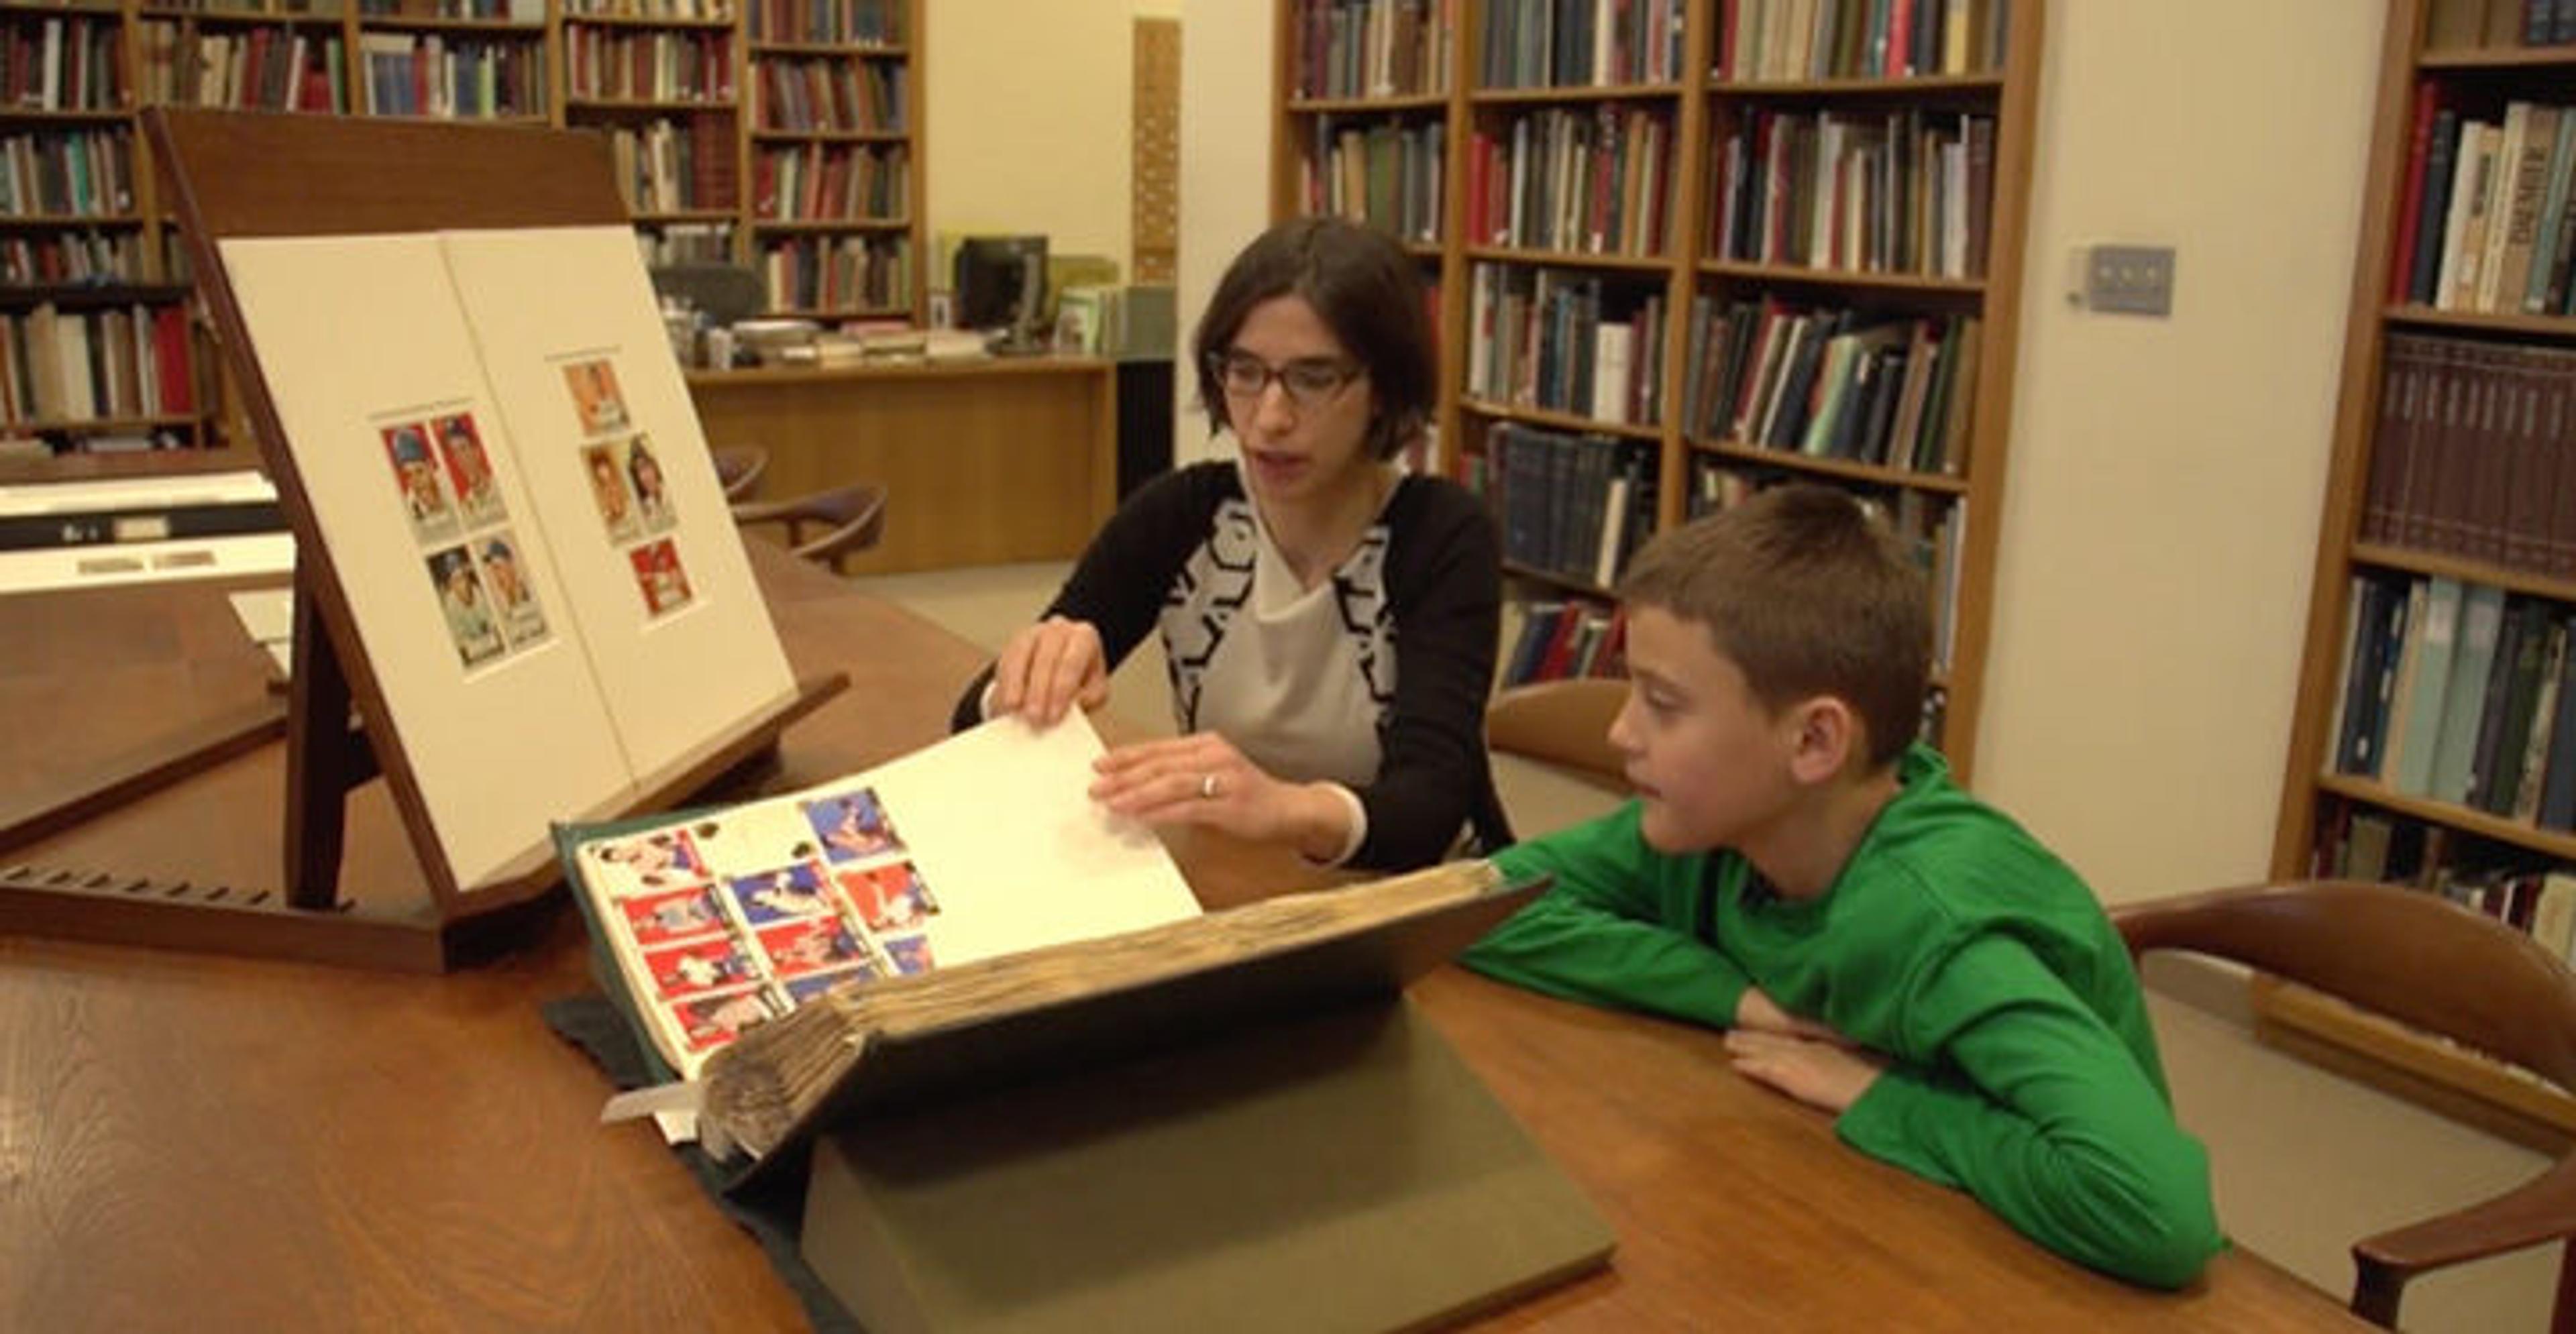 #MetKids Reporter Jayson interviews Freyda Spira about The Met's baseball card collection